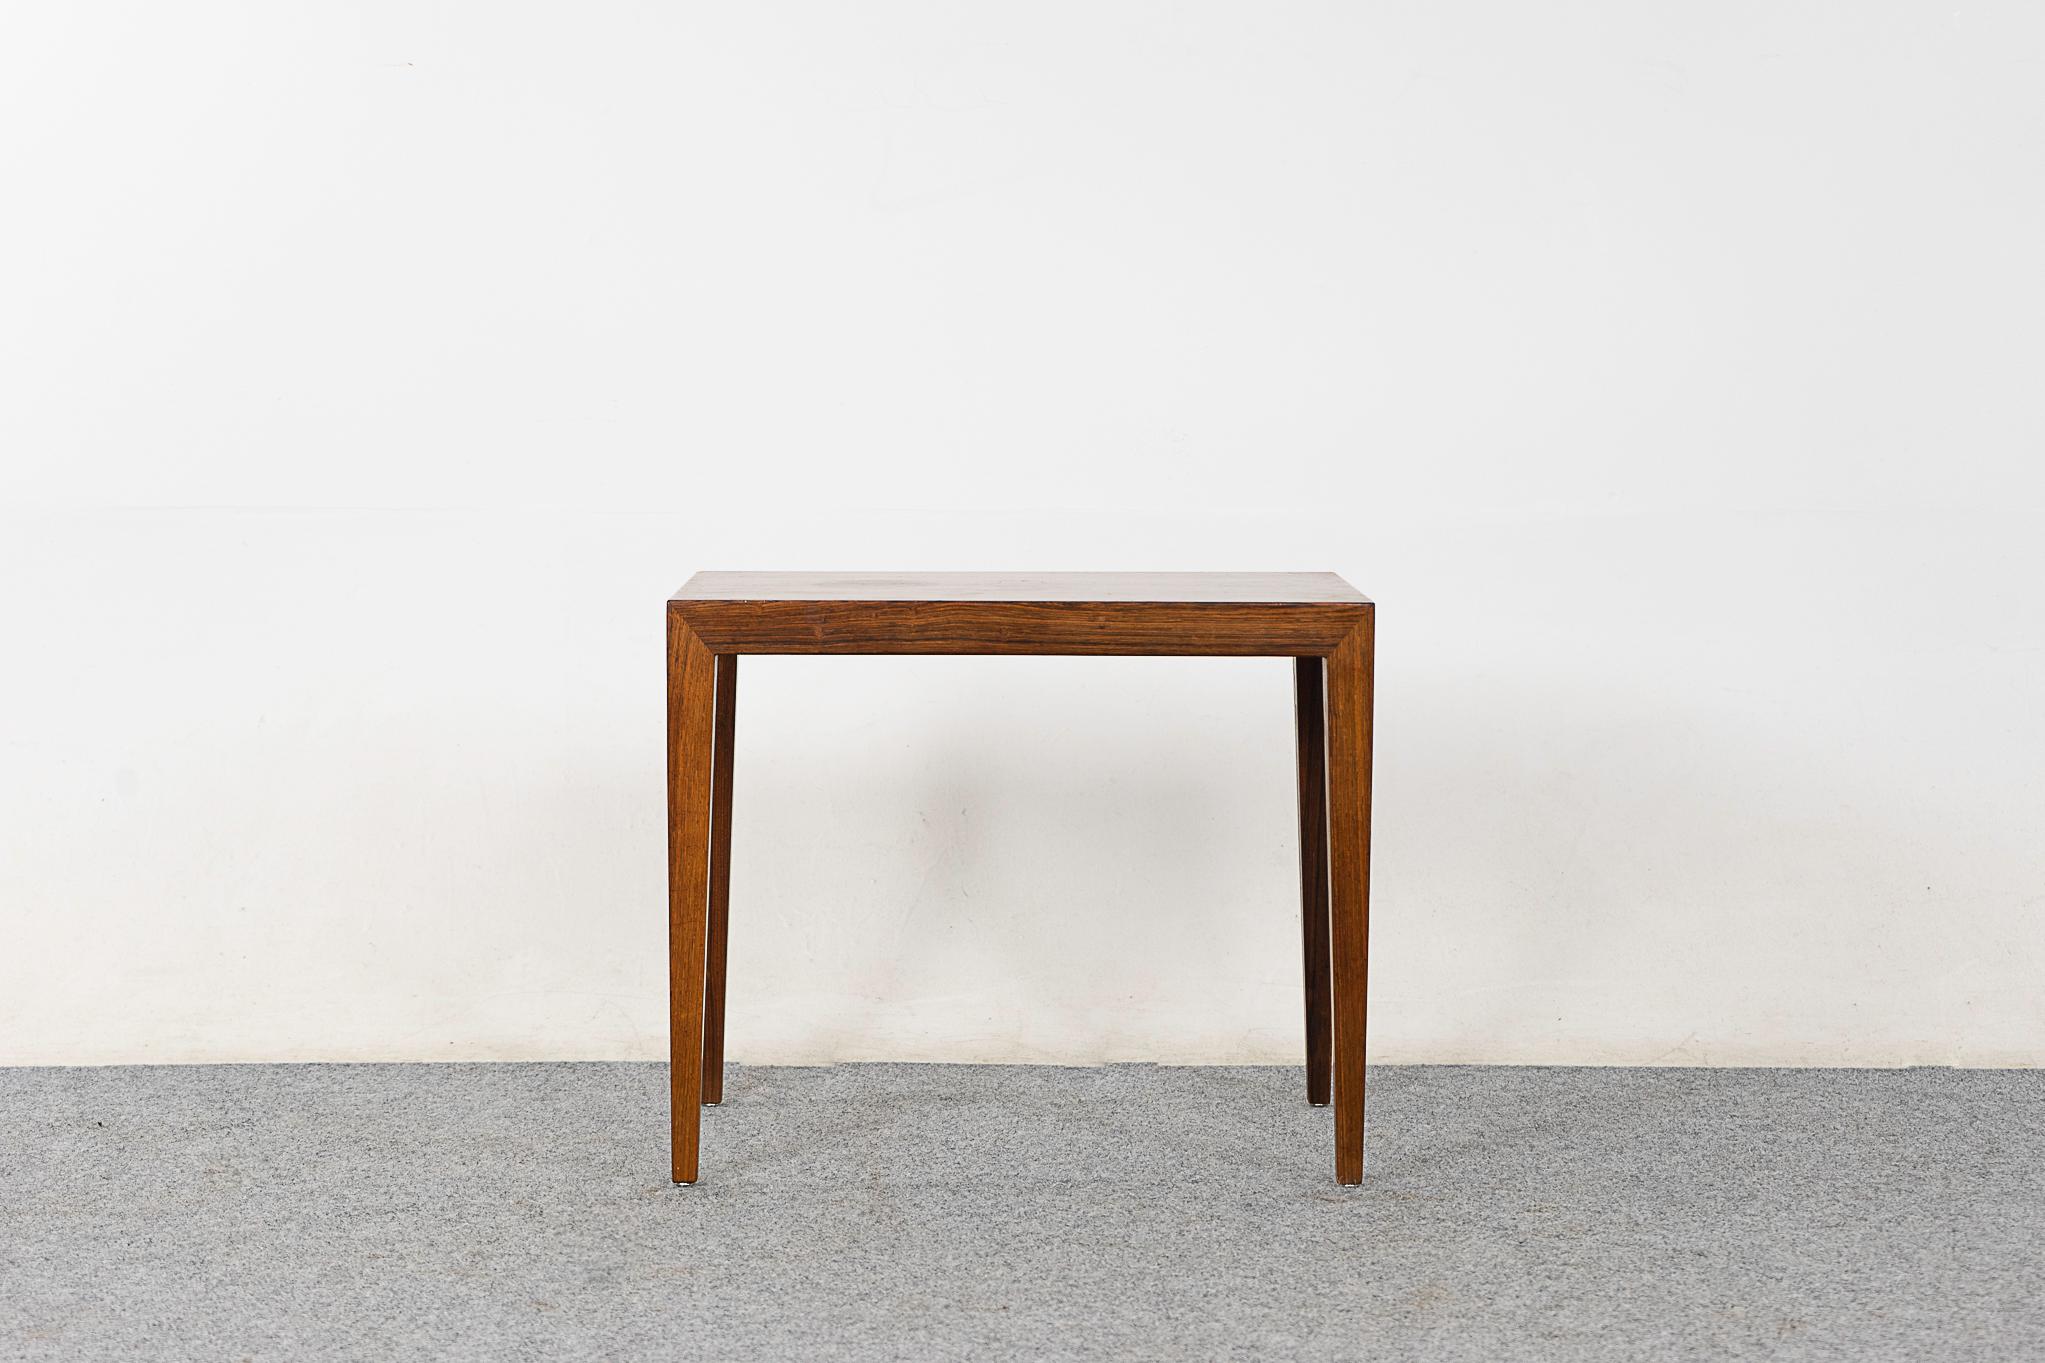 Rosewood mid-century side table by Severin Hansen for Haslev, circa 1960's. Slick corner joinery detailing, beautiful grain pattern up top!

Unrestored item with option to purchase in restored condition for an additional $100 USD. Restoration